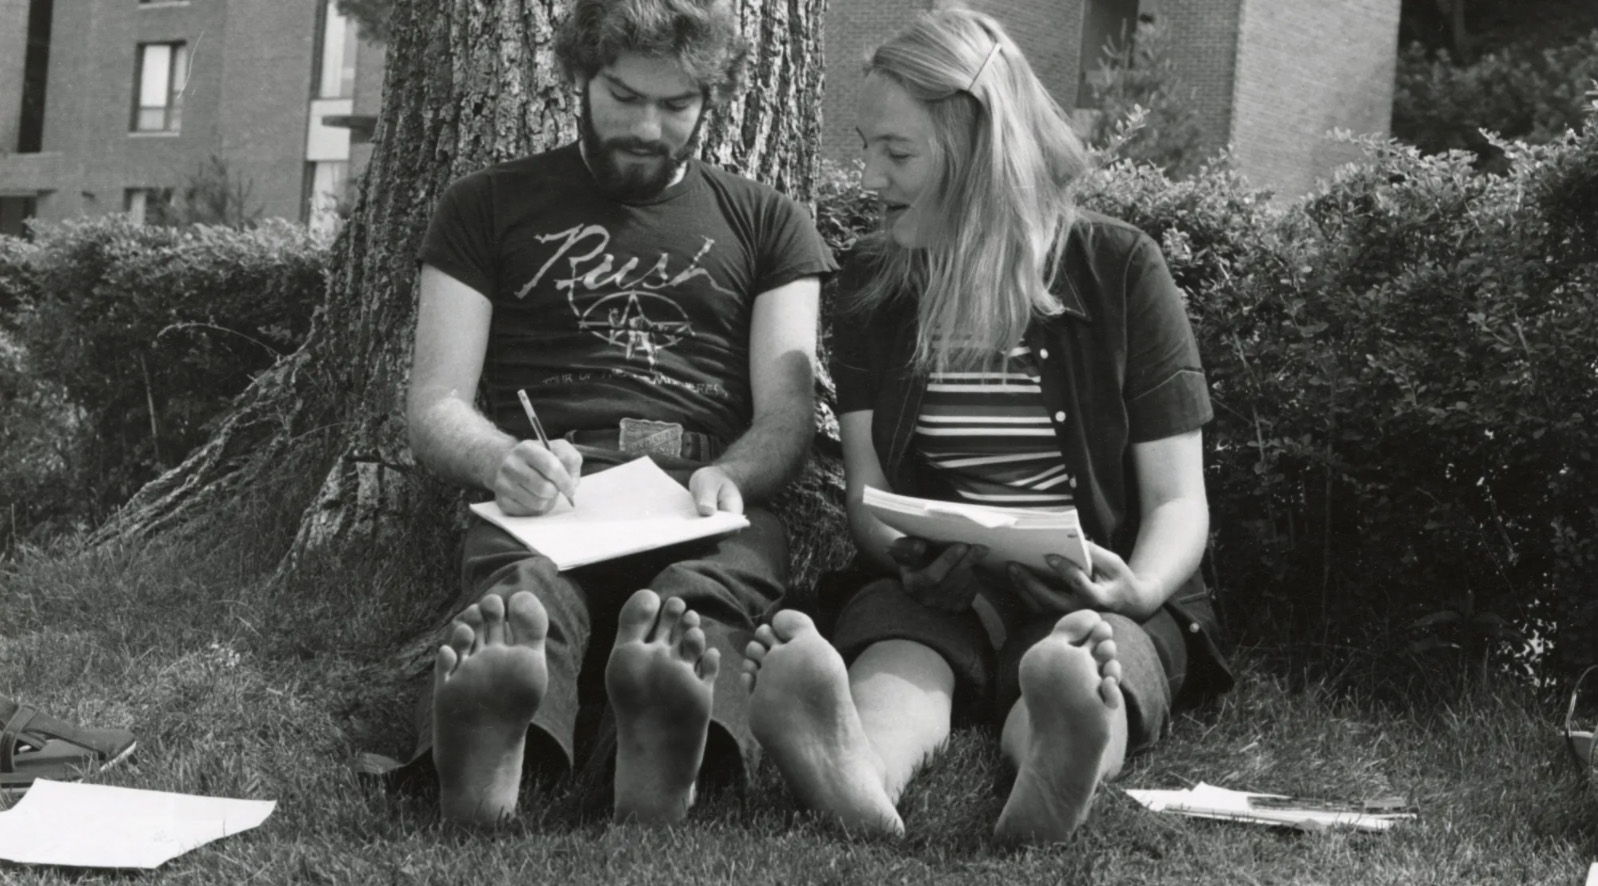 Two students working on a paper on the lawn